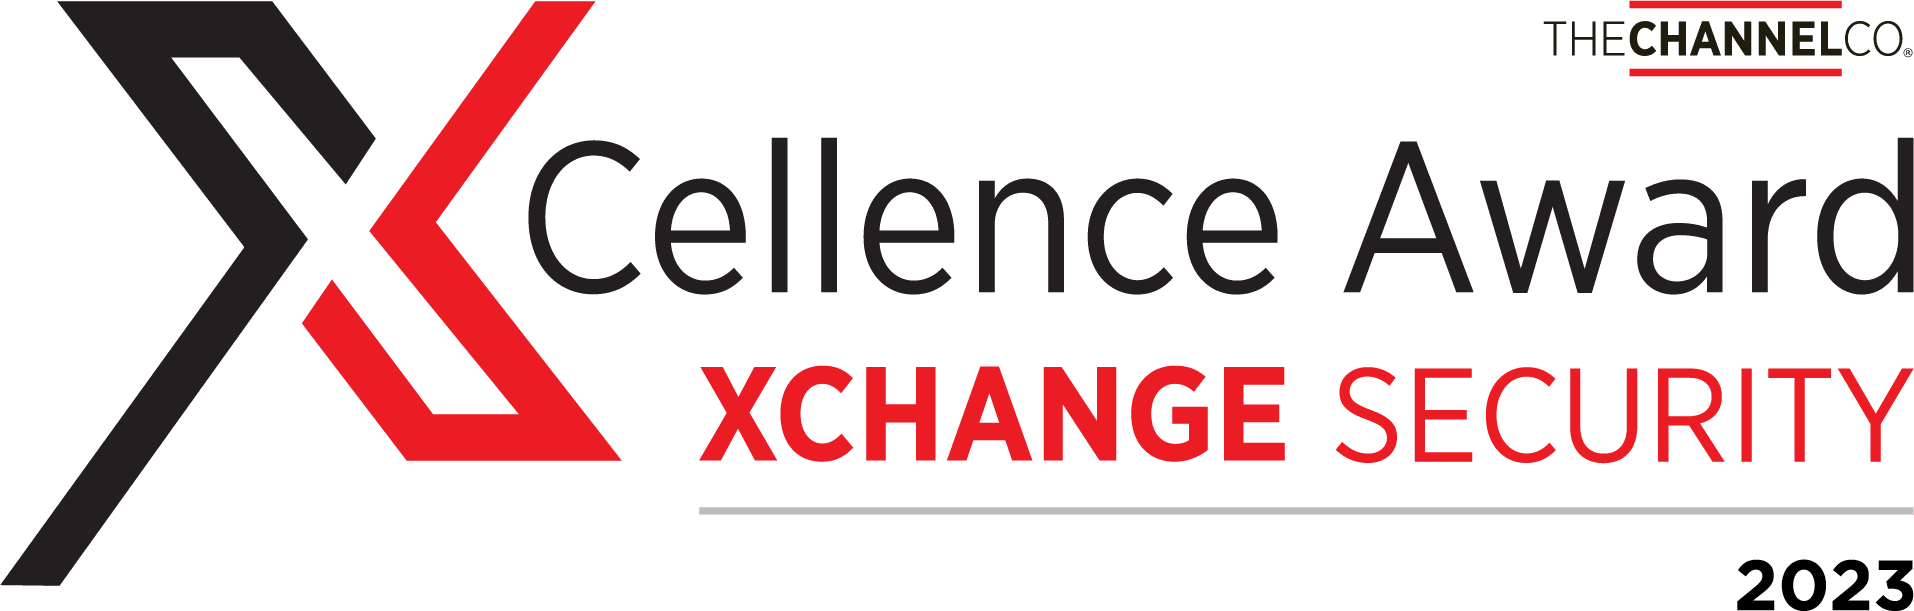 Syxsense Recognized as XCellence Award Finalist at XChange Security Conference 2023